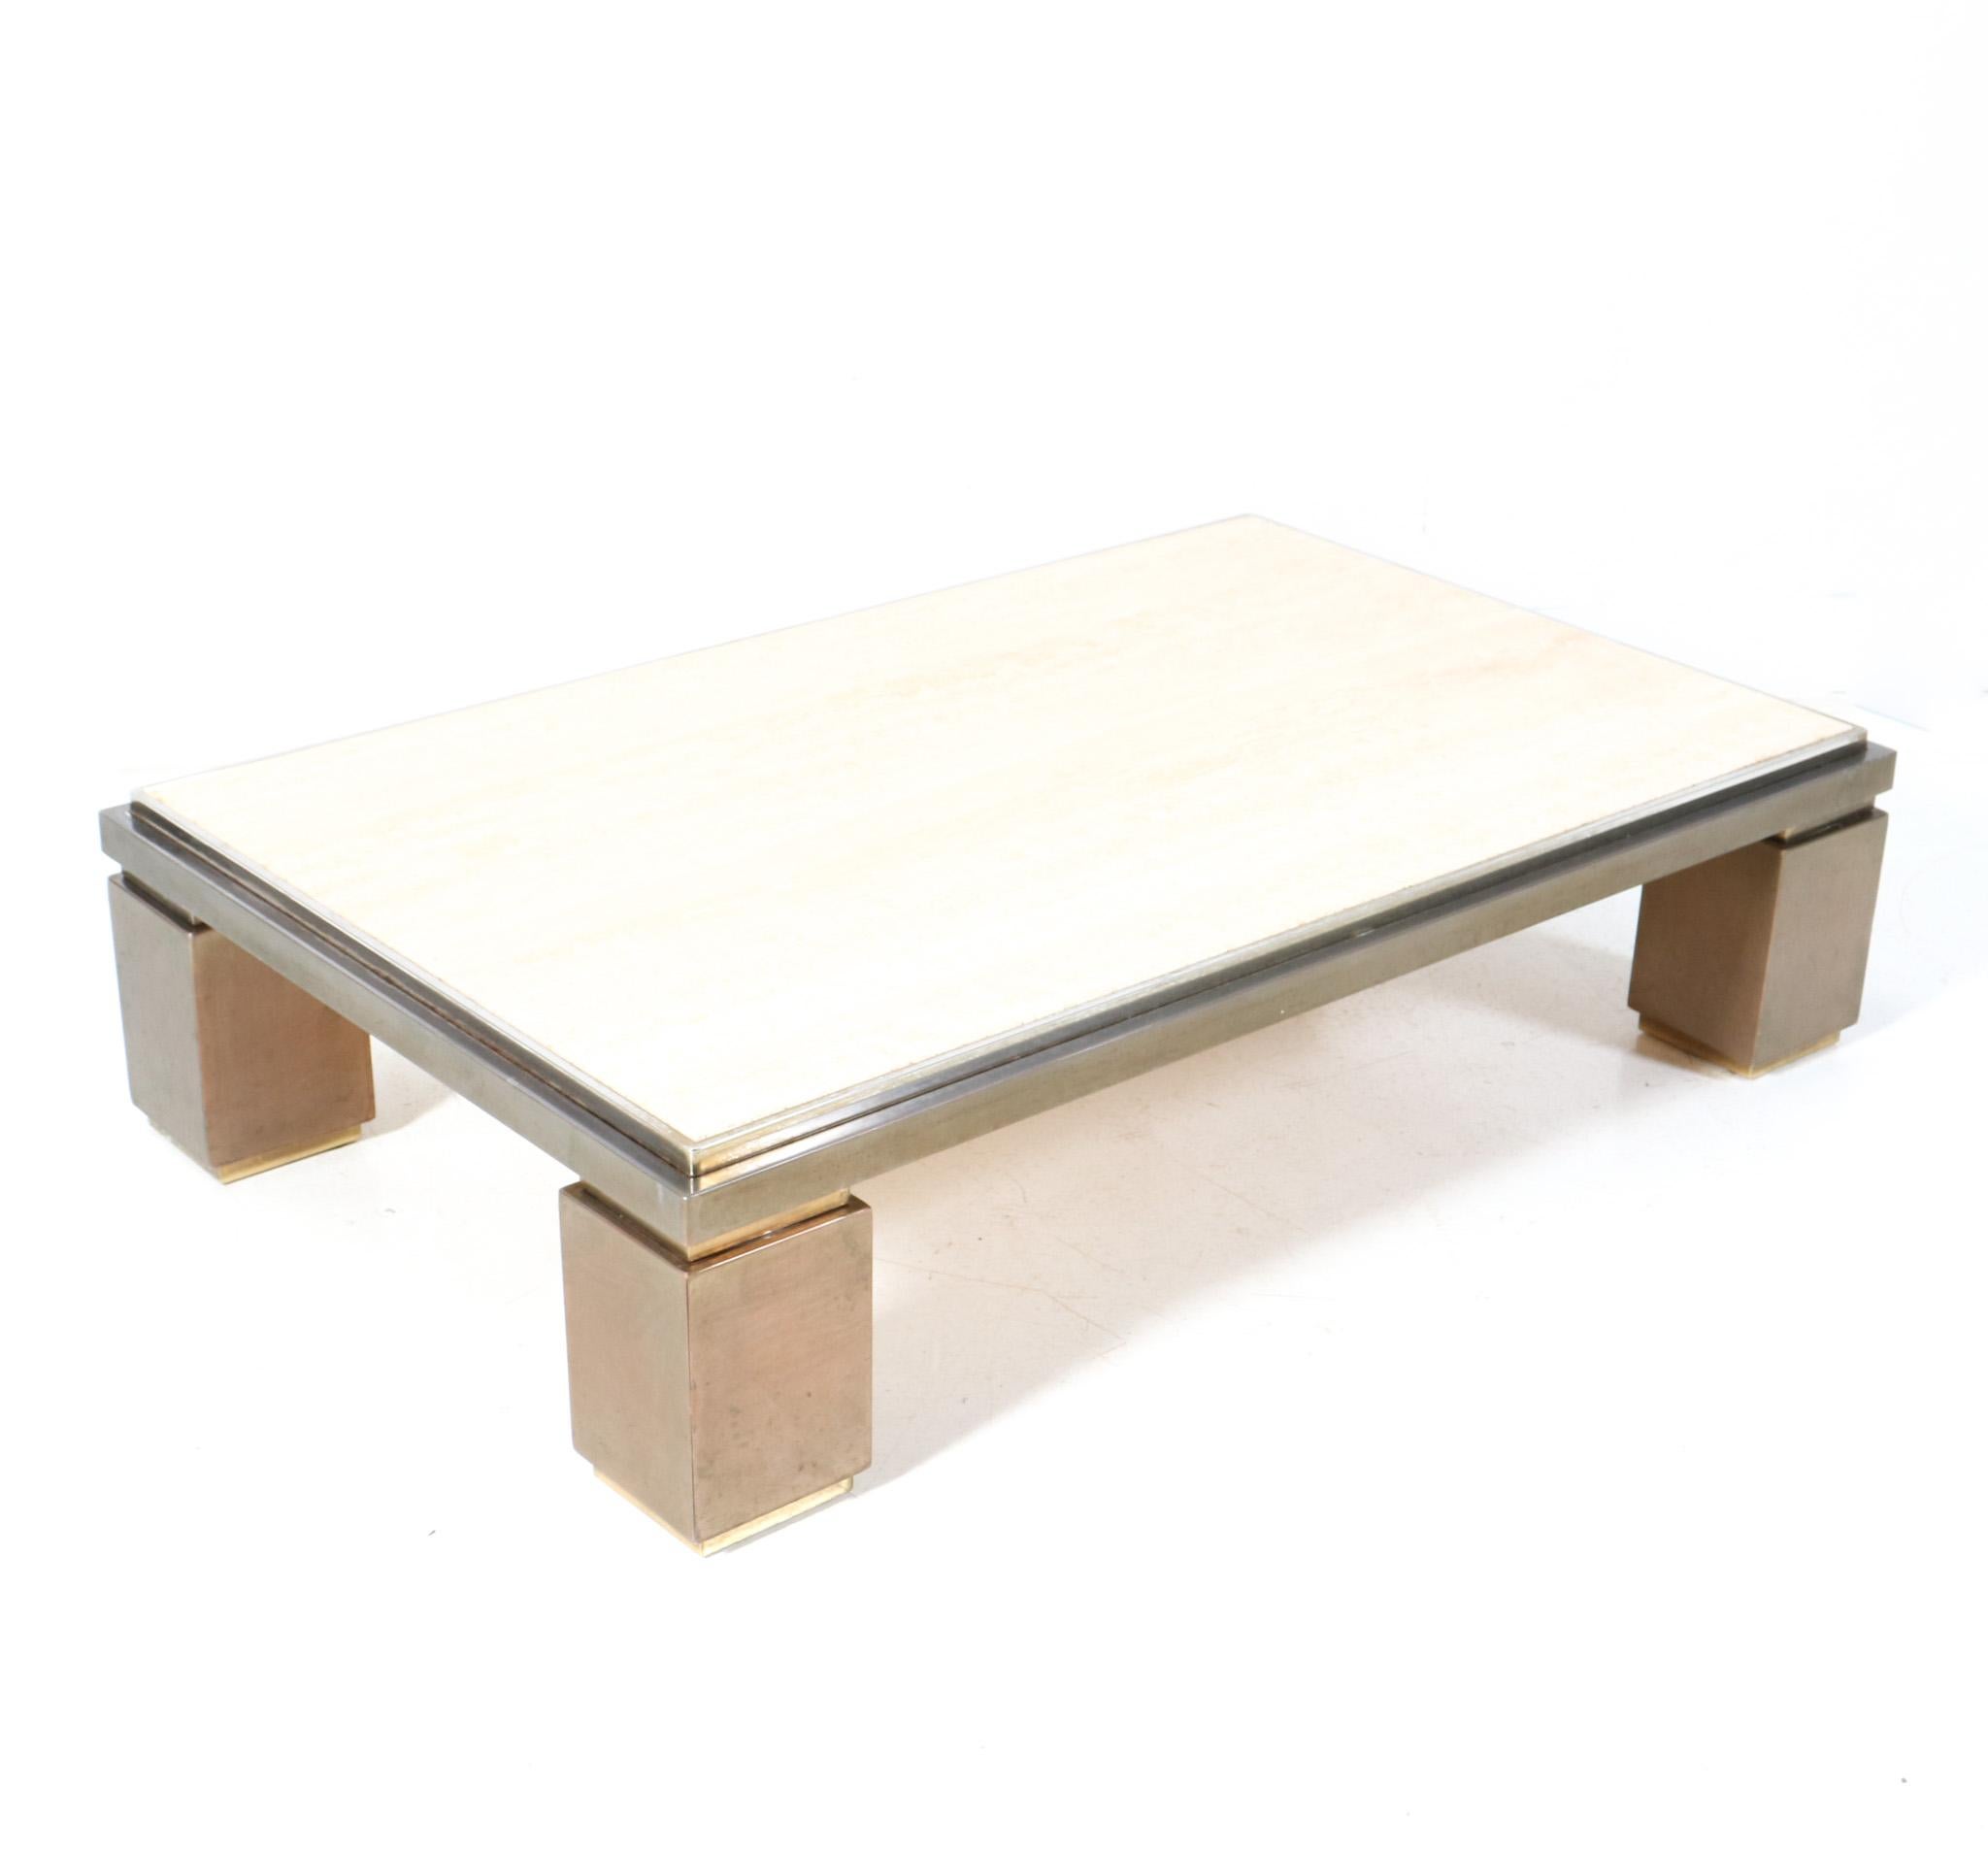 Late 20th Century Hollywood Regency  Coffee Table by Belgo Chrome with Travertine Top, 1970s For Sale